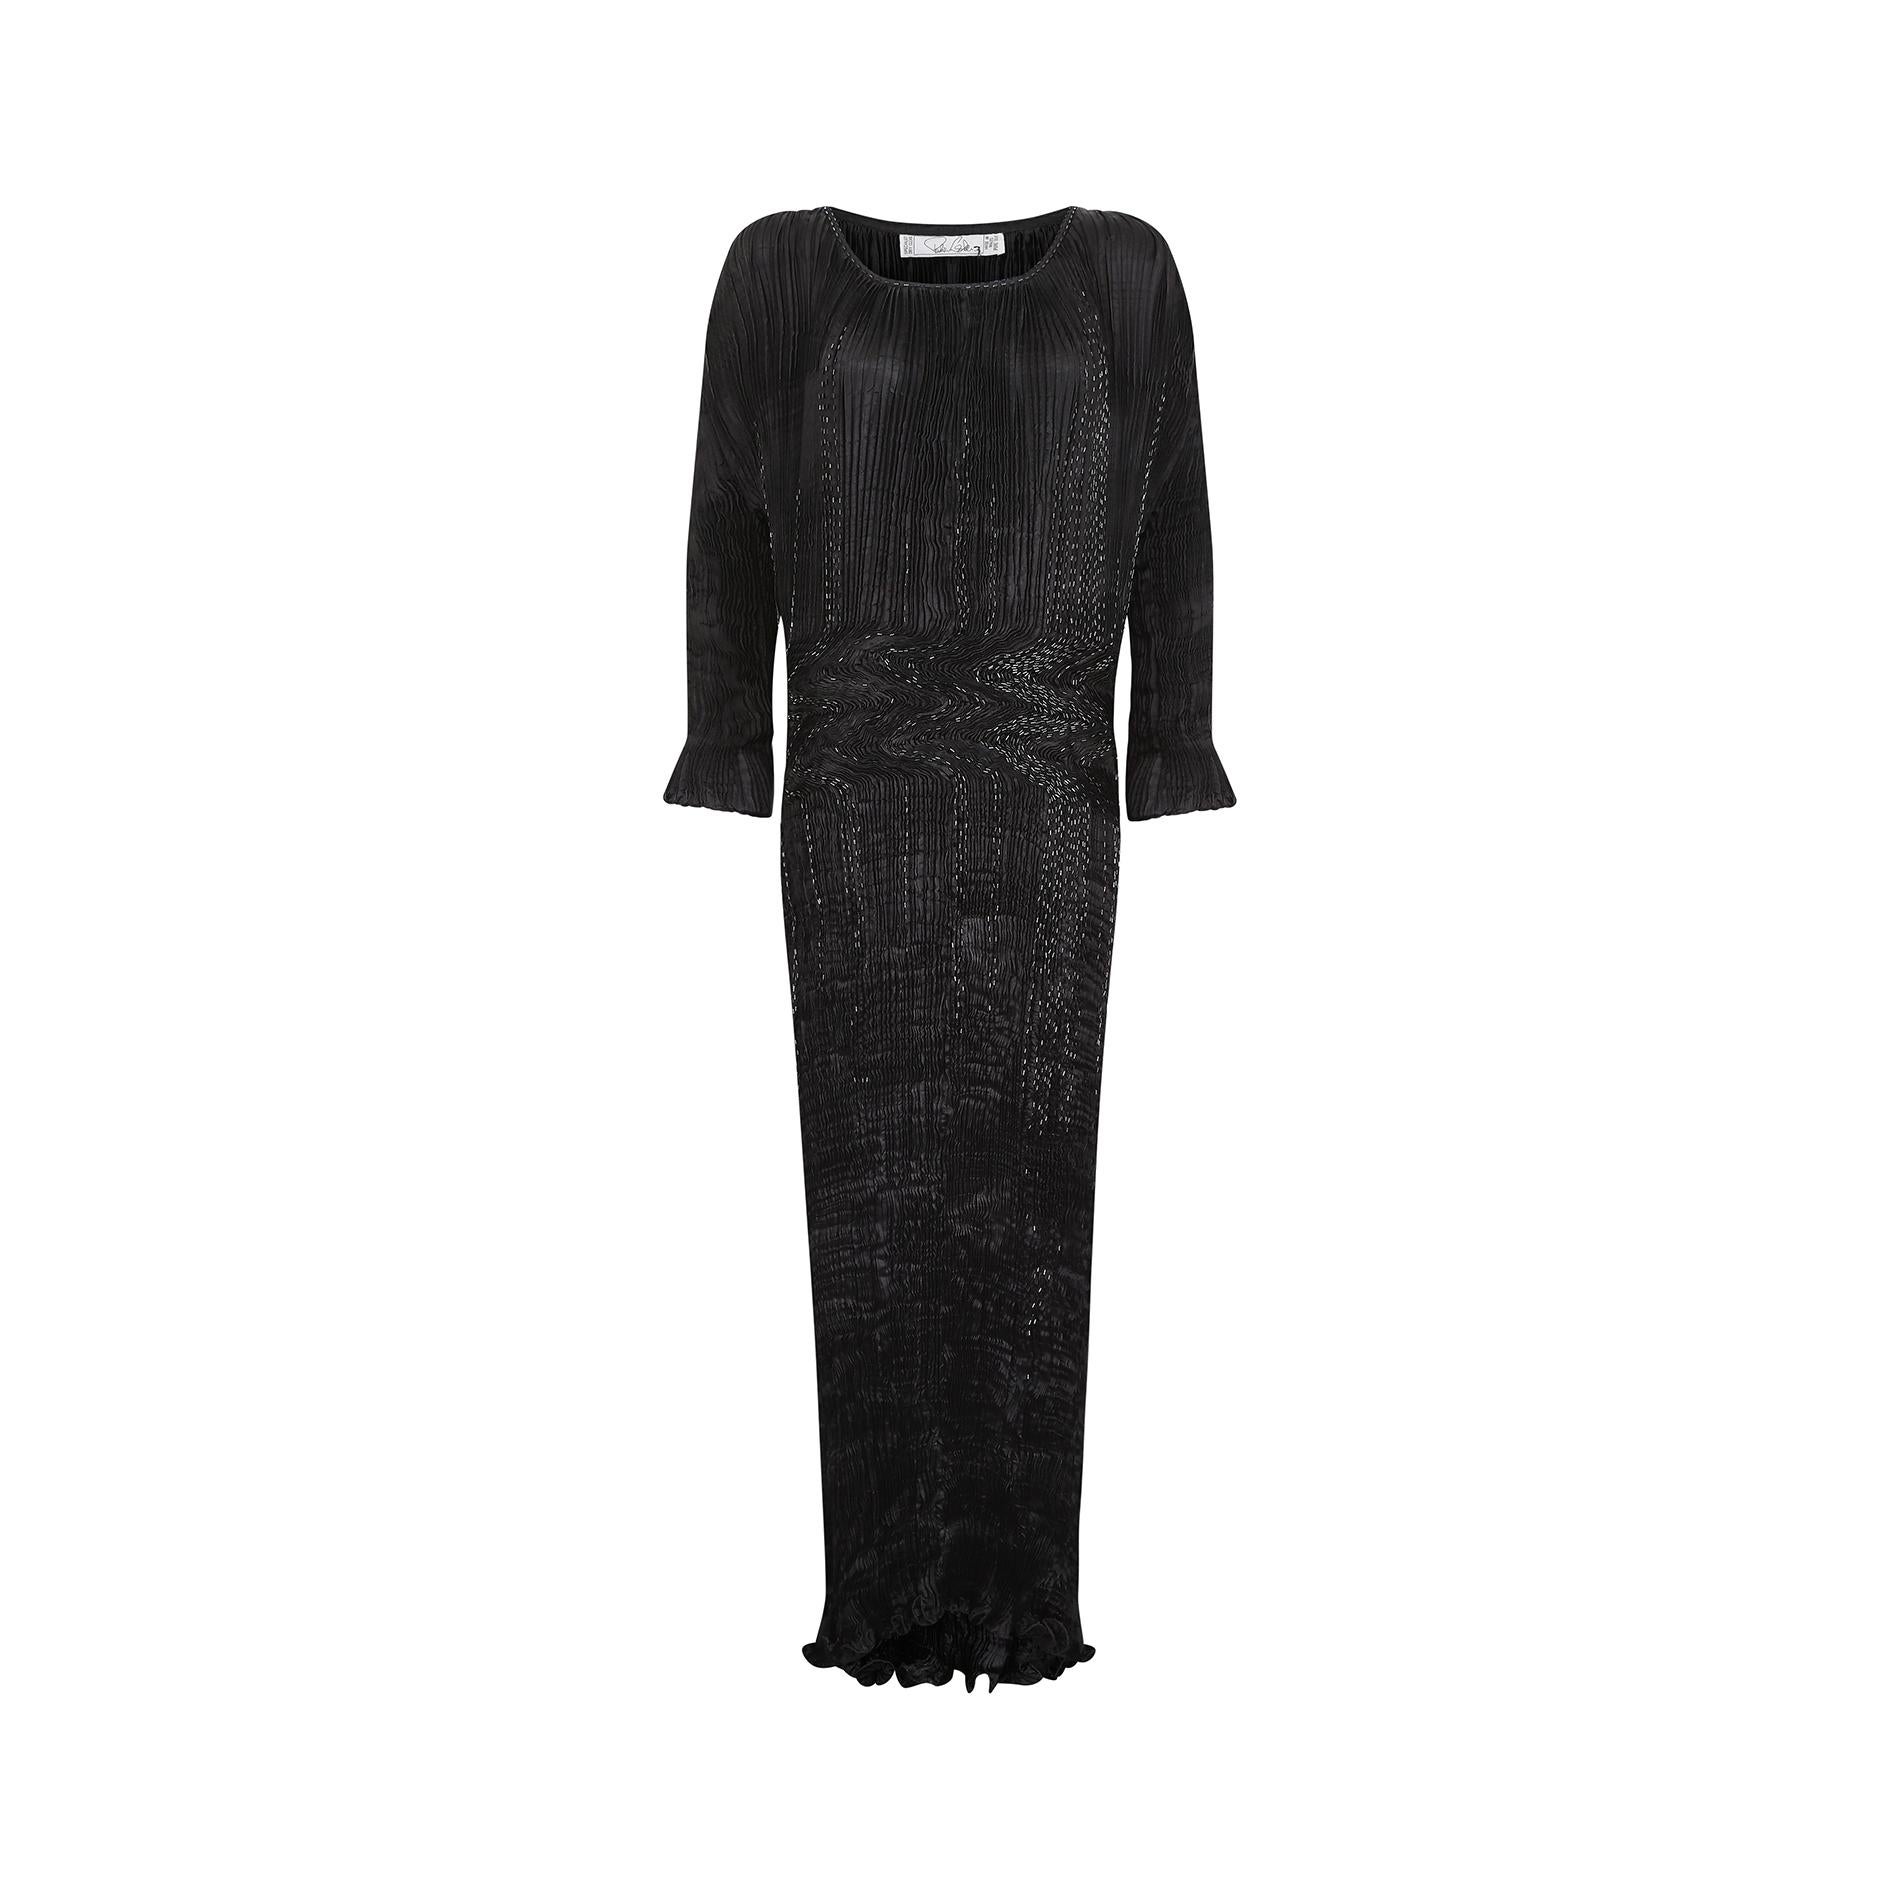 This is a truly elegant formal gown by renowned occasion wear designer Patricia Lester who has been designing costume and fashion with her husband Charles, for over 50 years.  Made from an inky black and very finely hand pleated silk which gives the